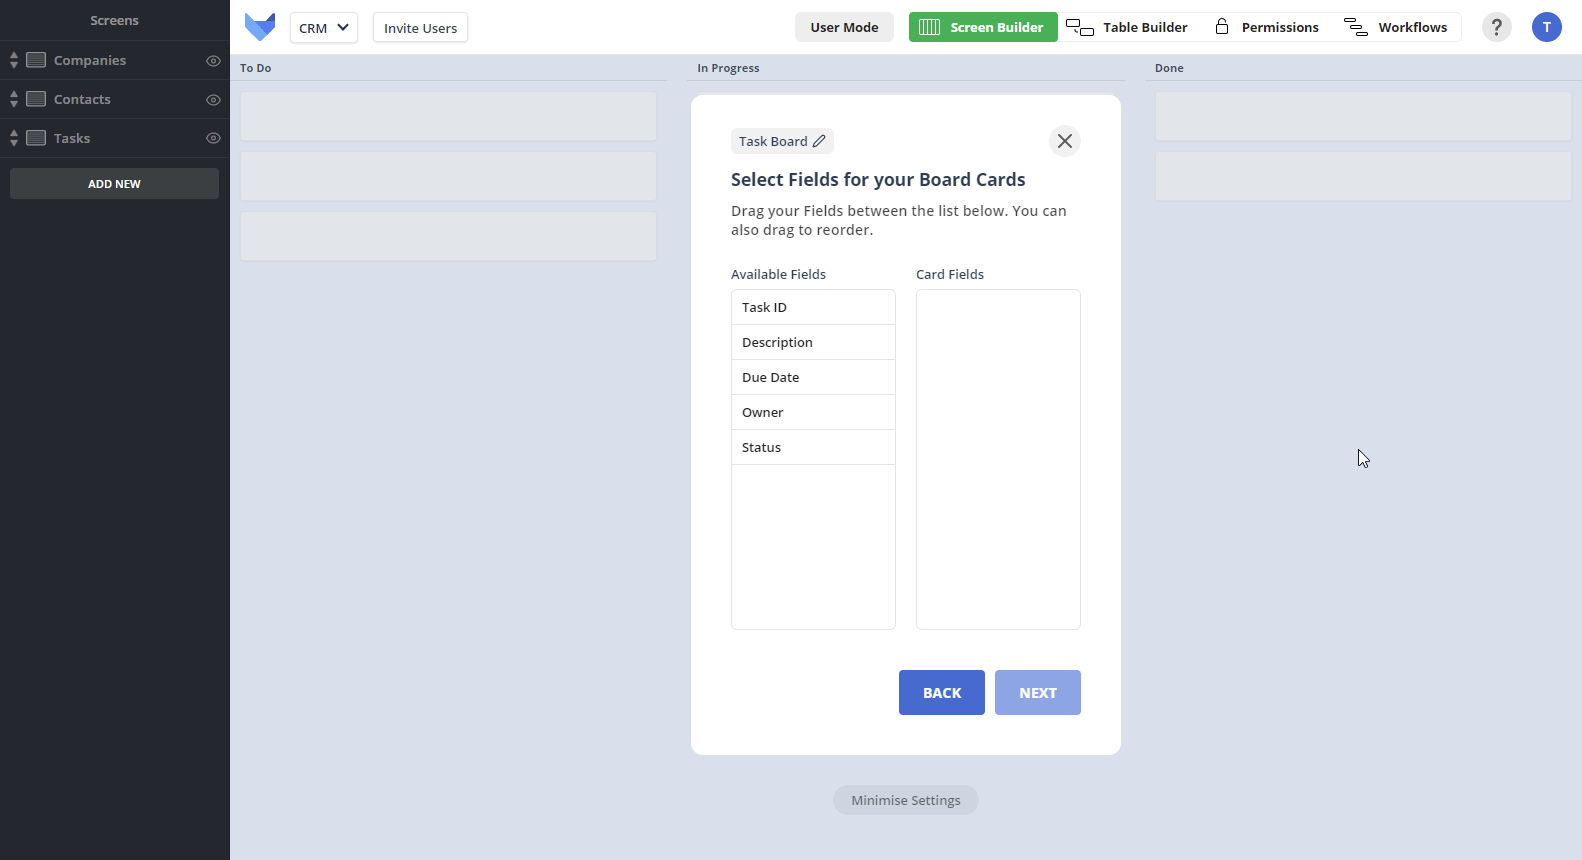 Specify Fields to show on Board Cards